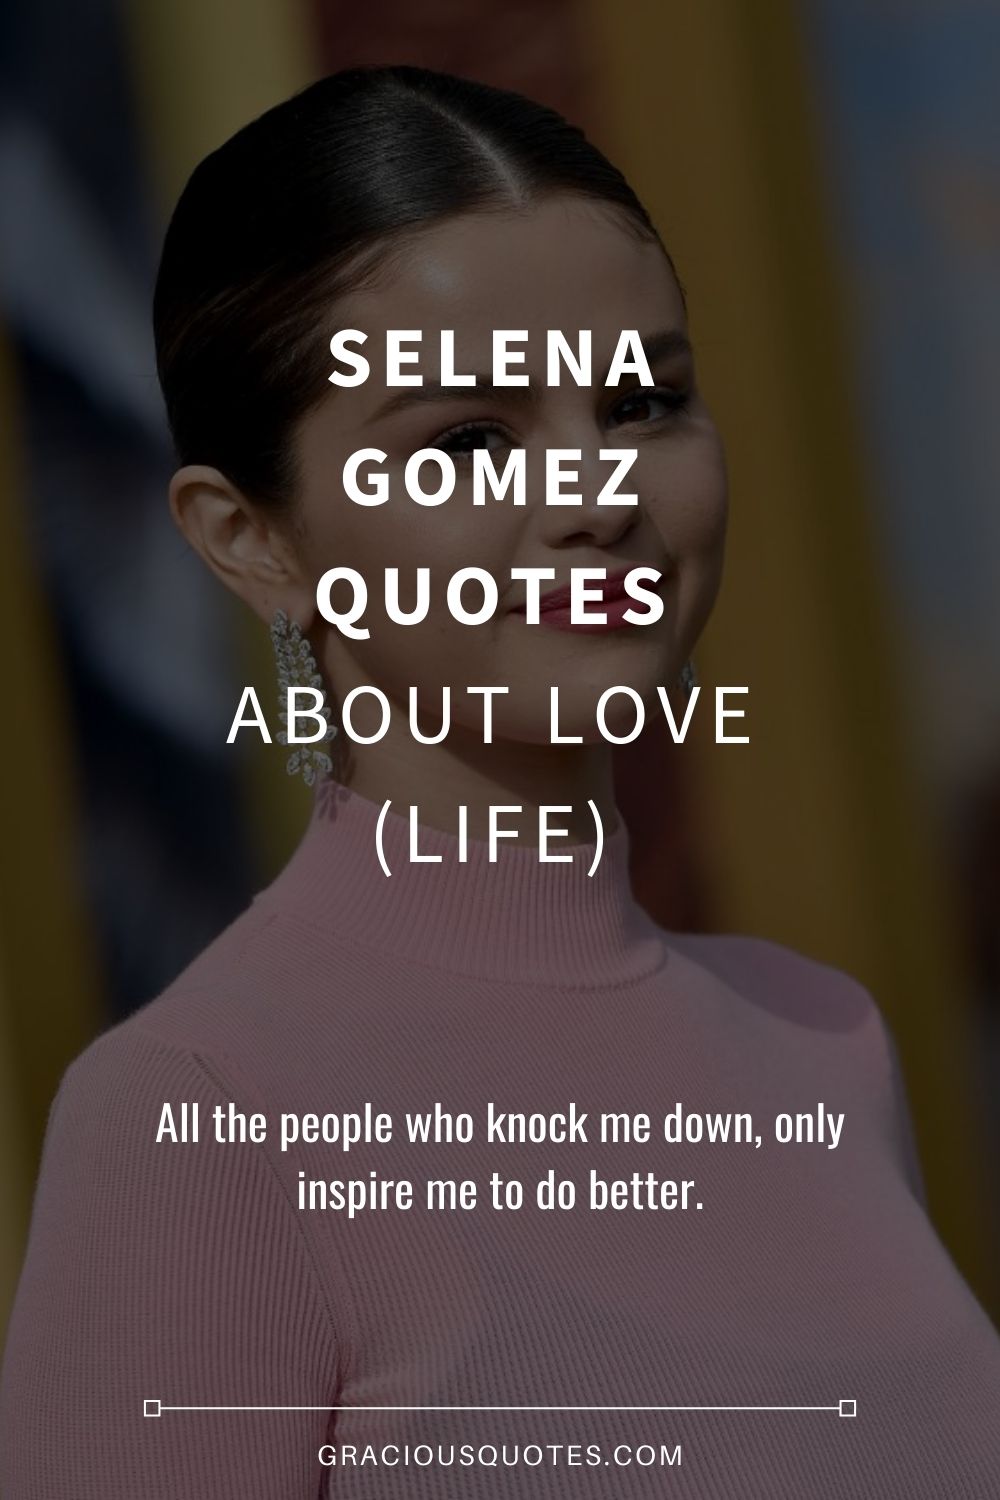 Selena Gomez Quotes About Love (LIFE) - Gracious Quotes